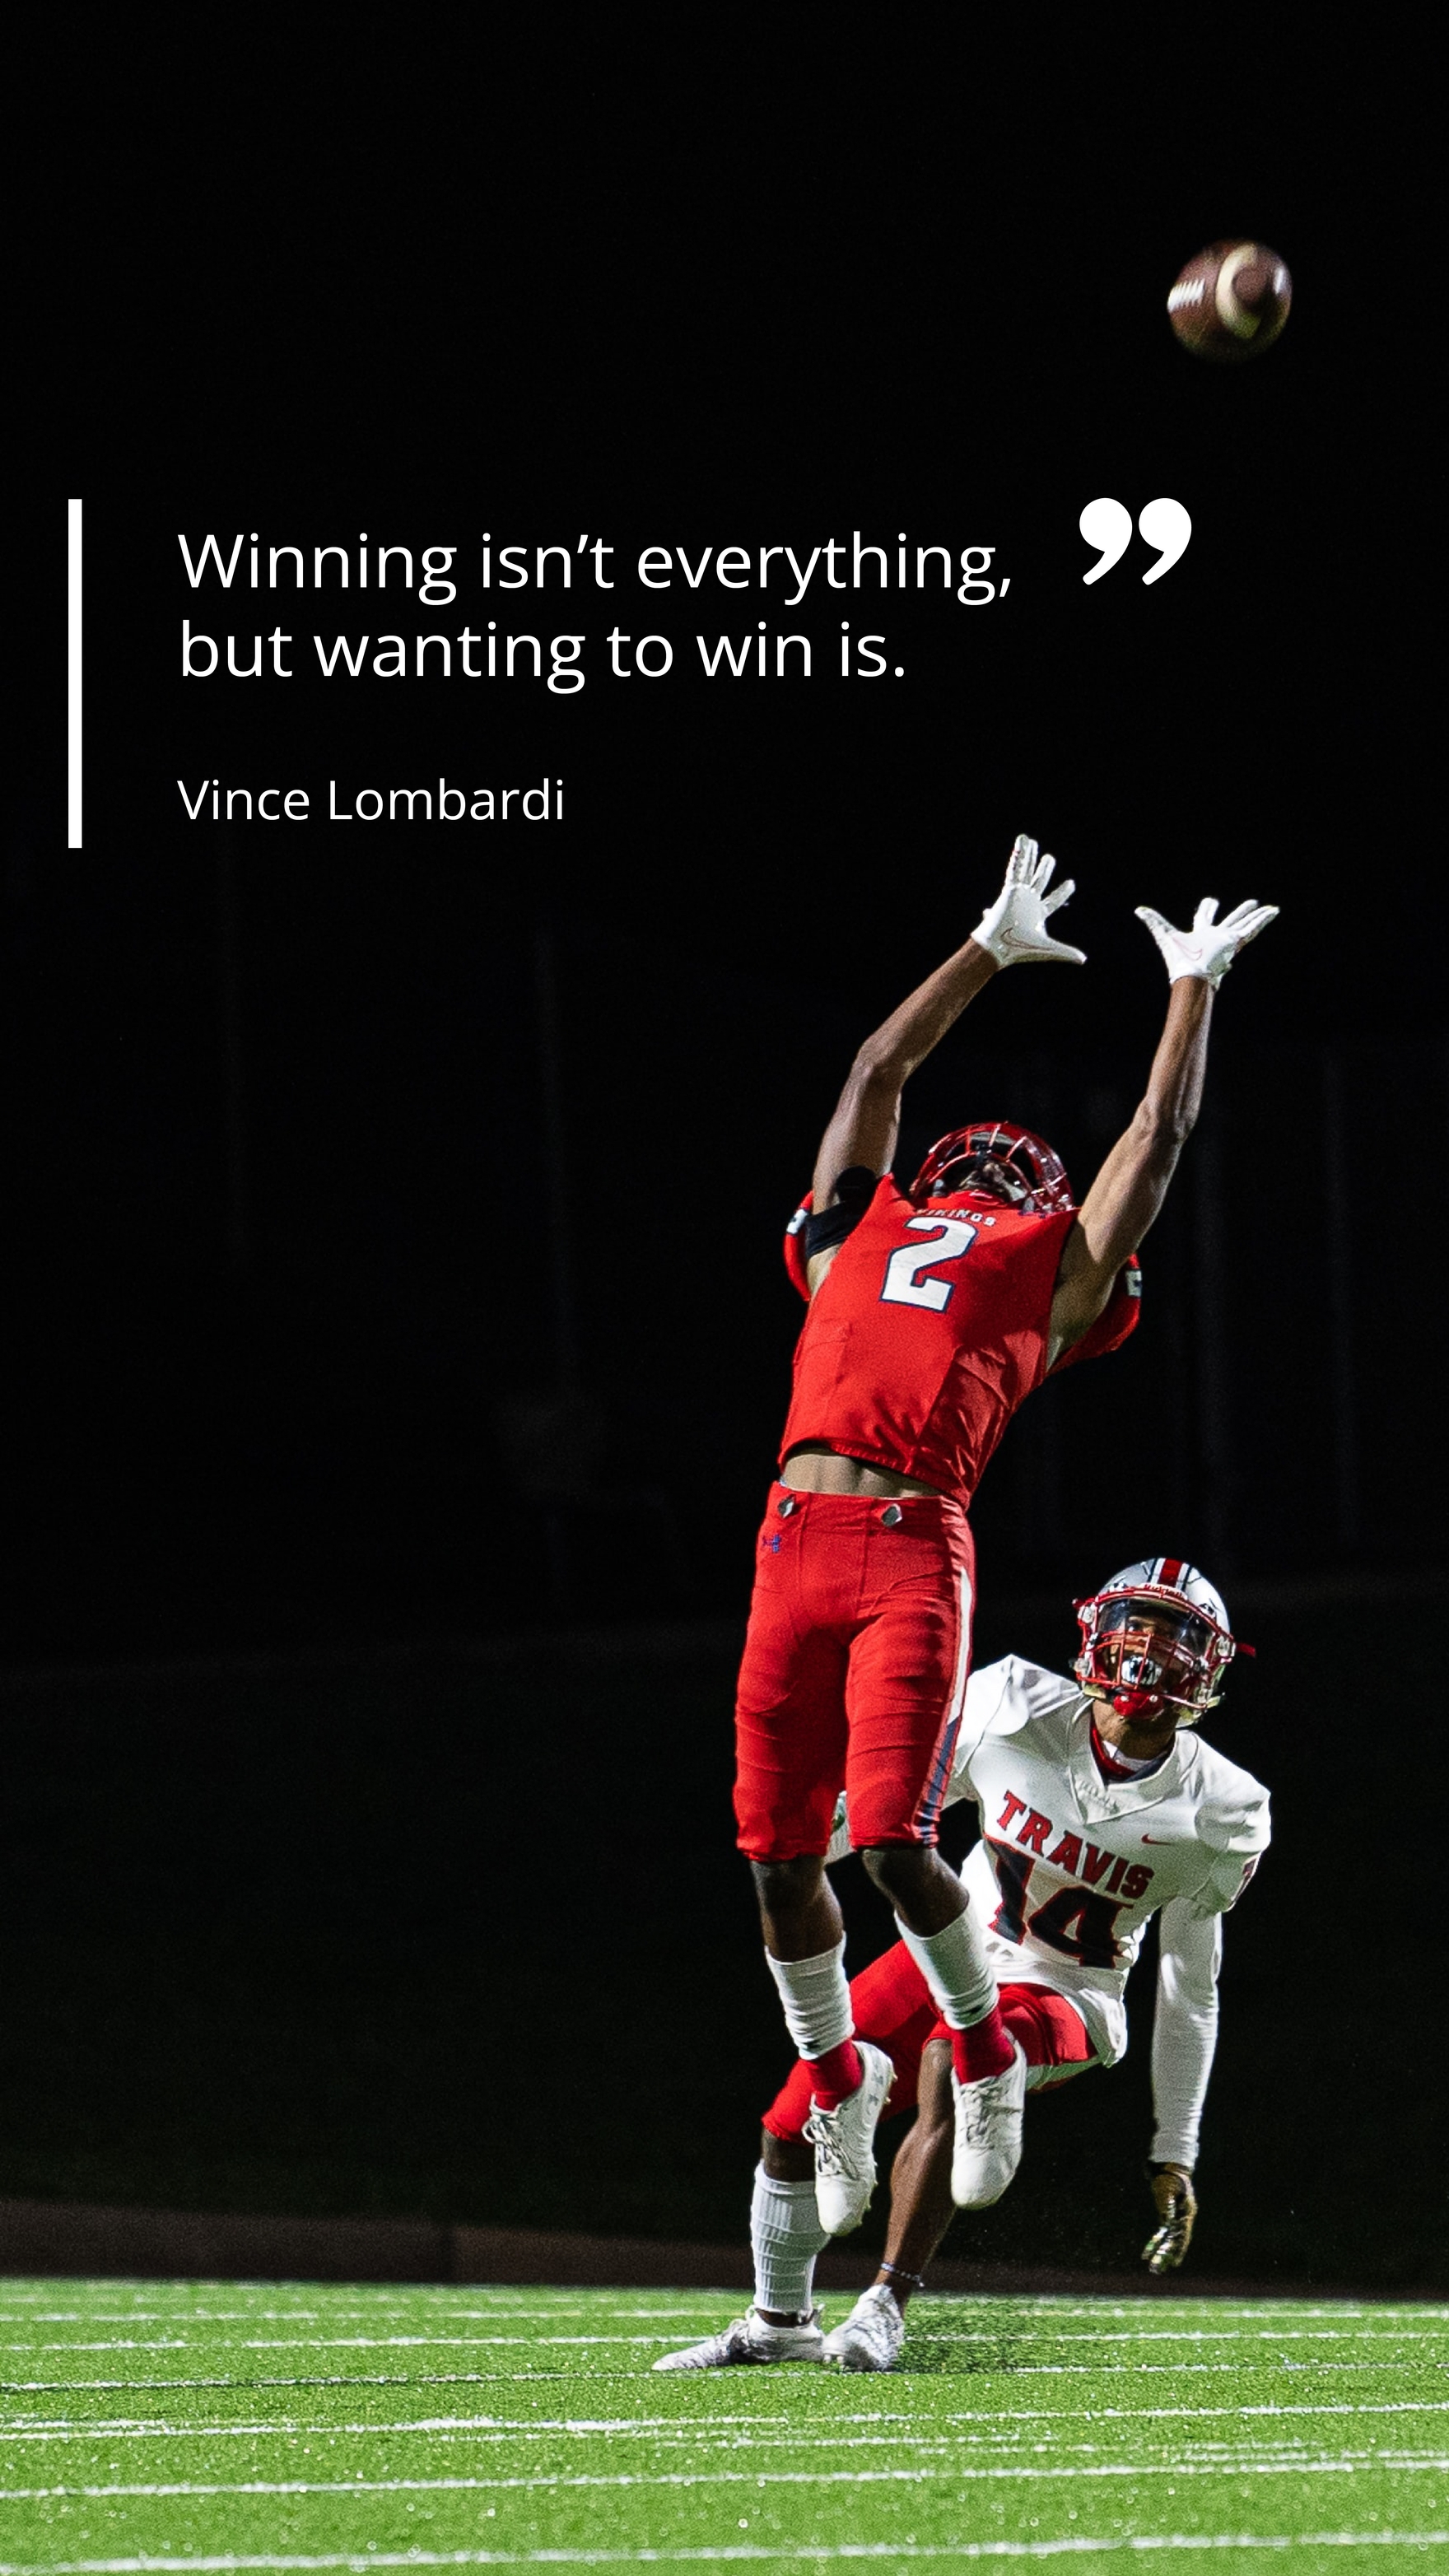 Vince Lombardi - Winning isn’t everything, but wanting to win is